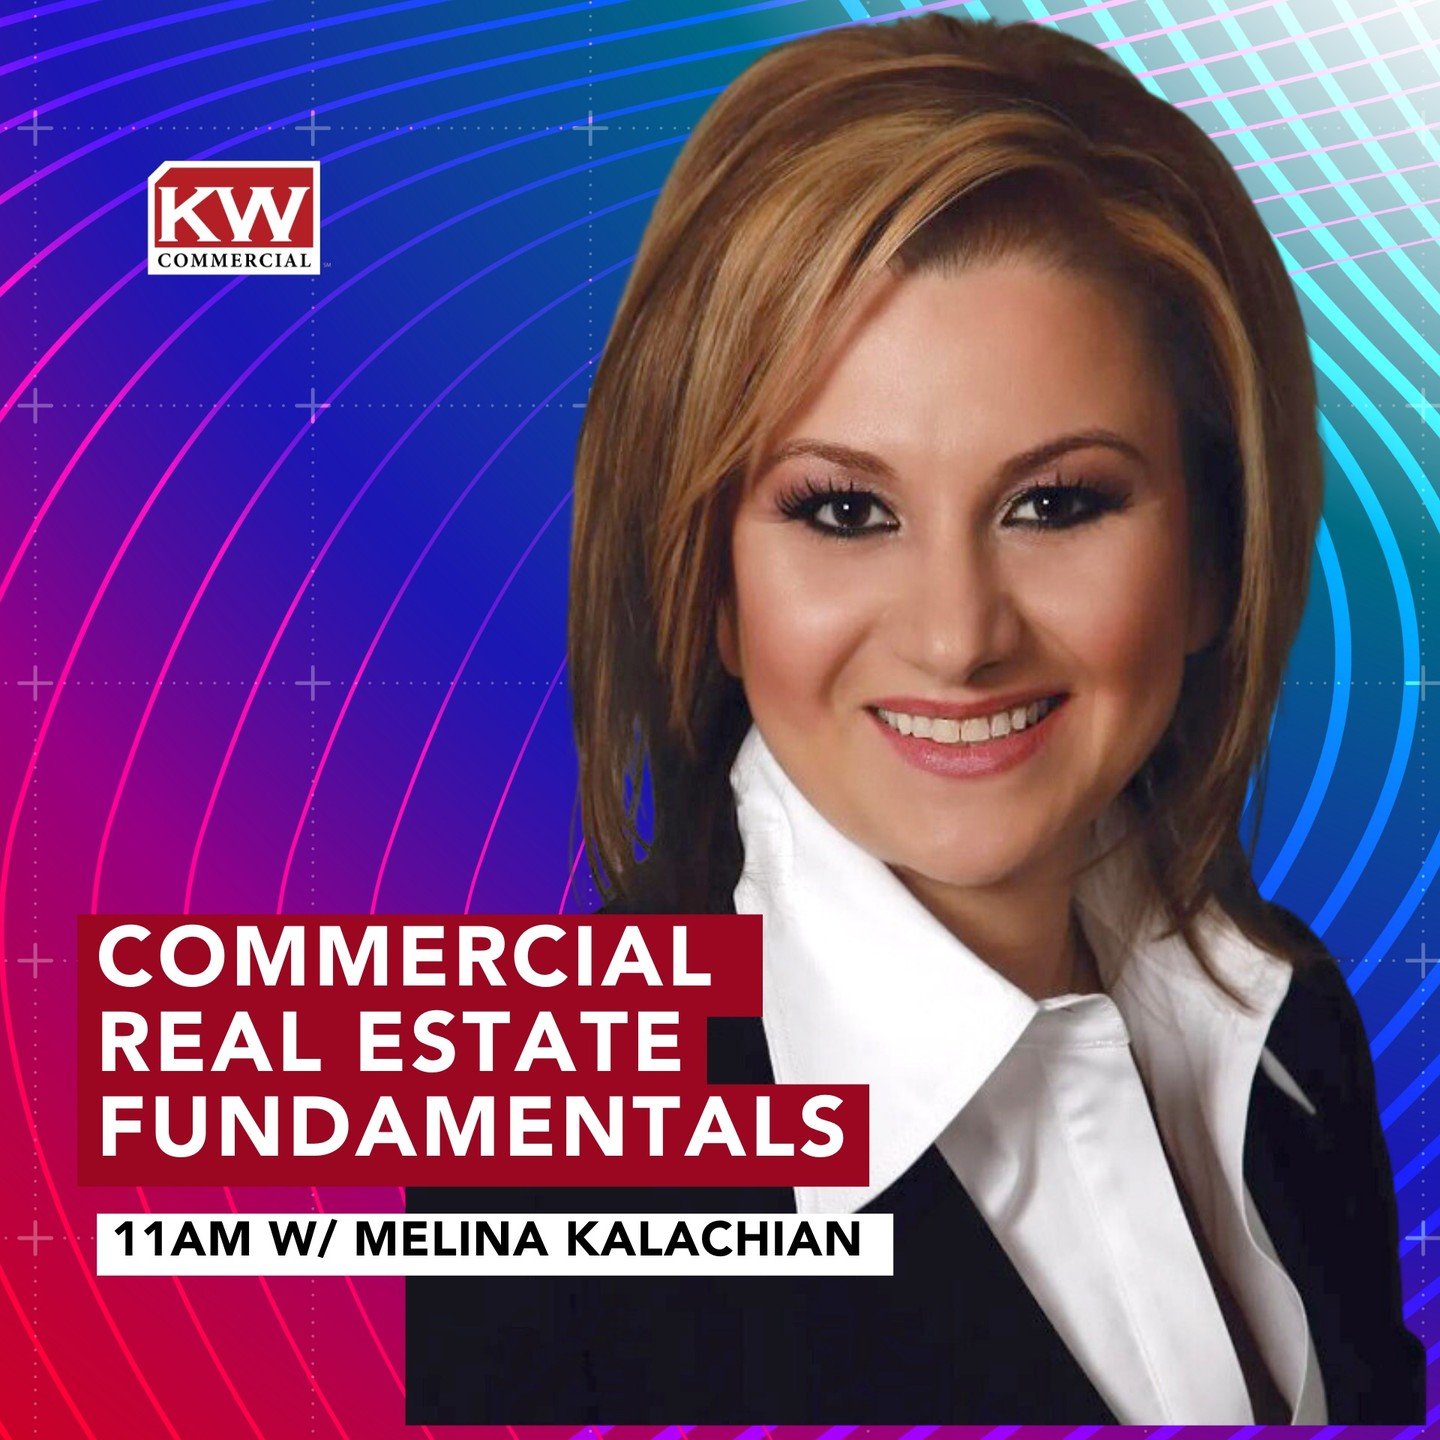 Commercial Real Estate Fundamentals 
Thu May 2nd 11:00am - 2:00pm
KW Pasadena Cafe, 199 S Los Robles Ave #130, Pasadena, CA 91101, USA 

Ready to broaden your real estate horizons? Dive into the dynamic world of commercial properties at our exclusive